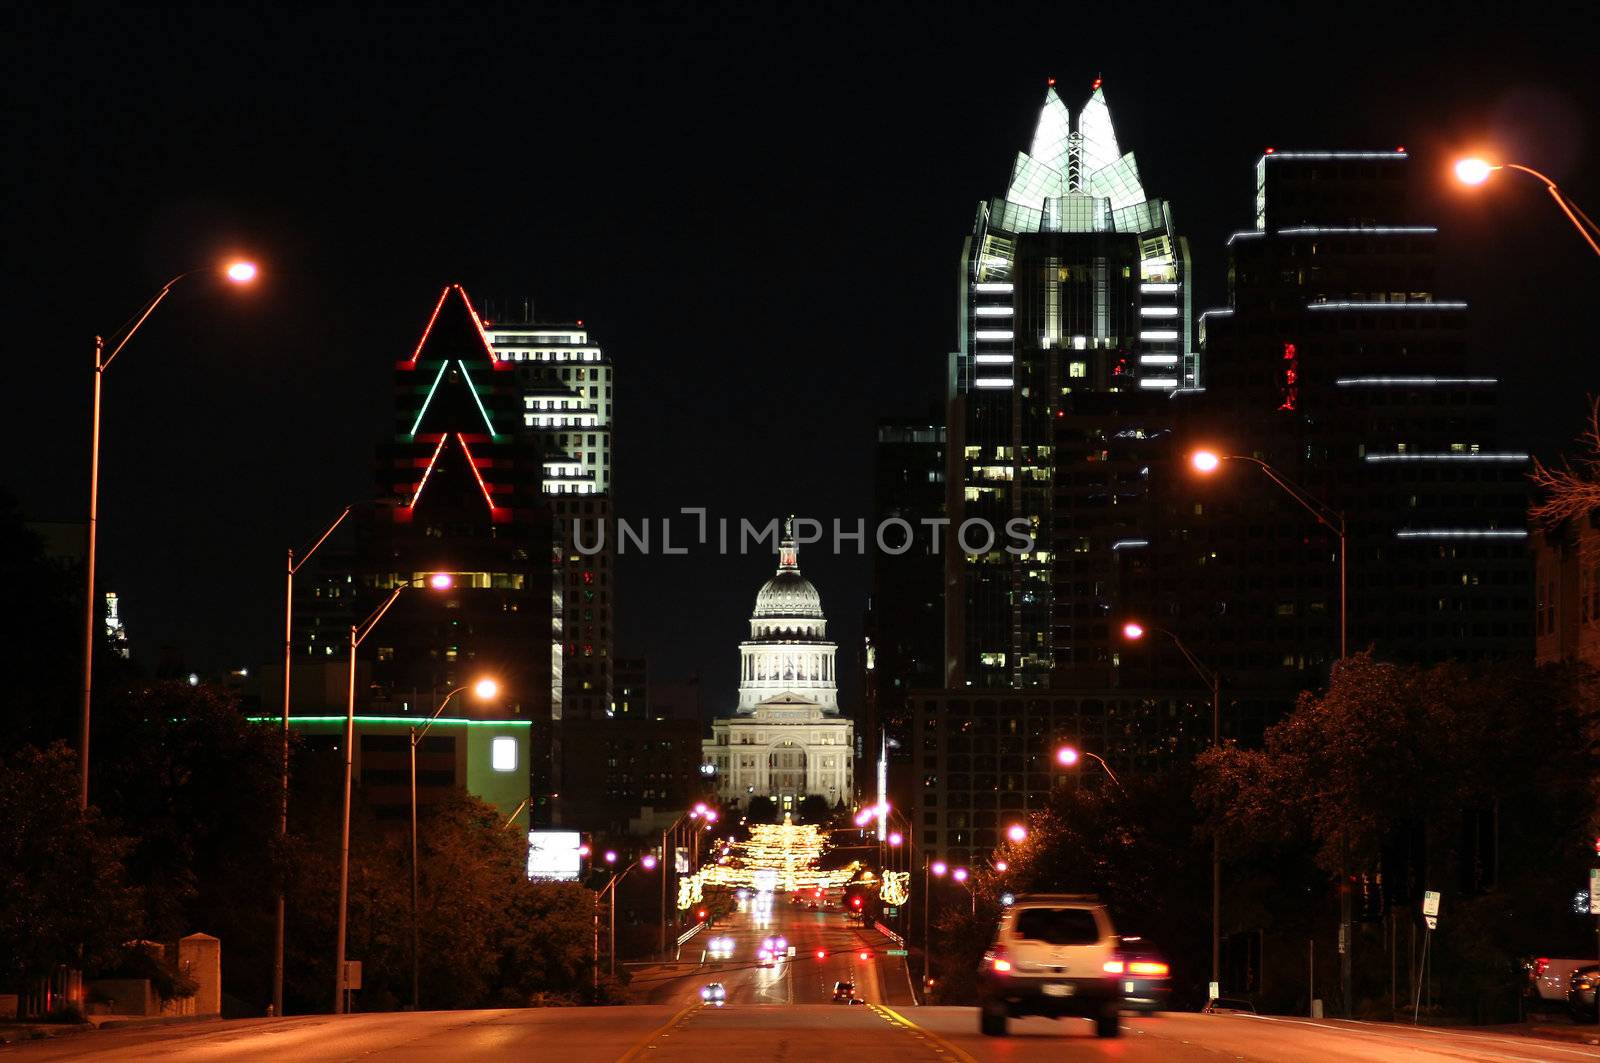 A nice shot of the Texas State Capitol Building in downtown Austin, Texas at night.